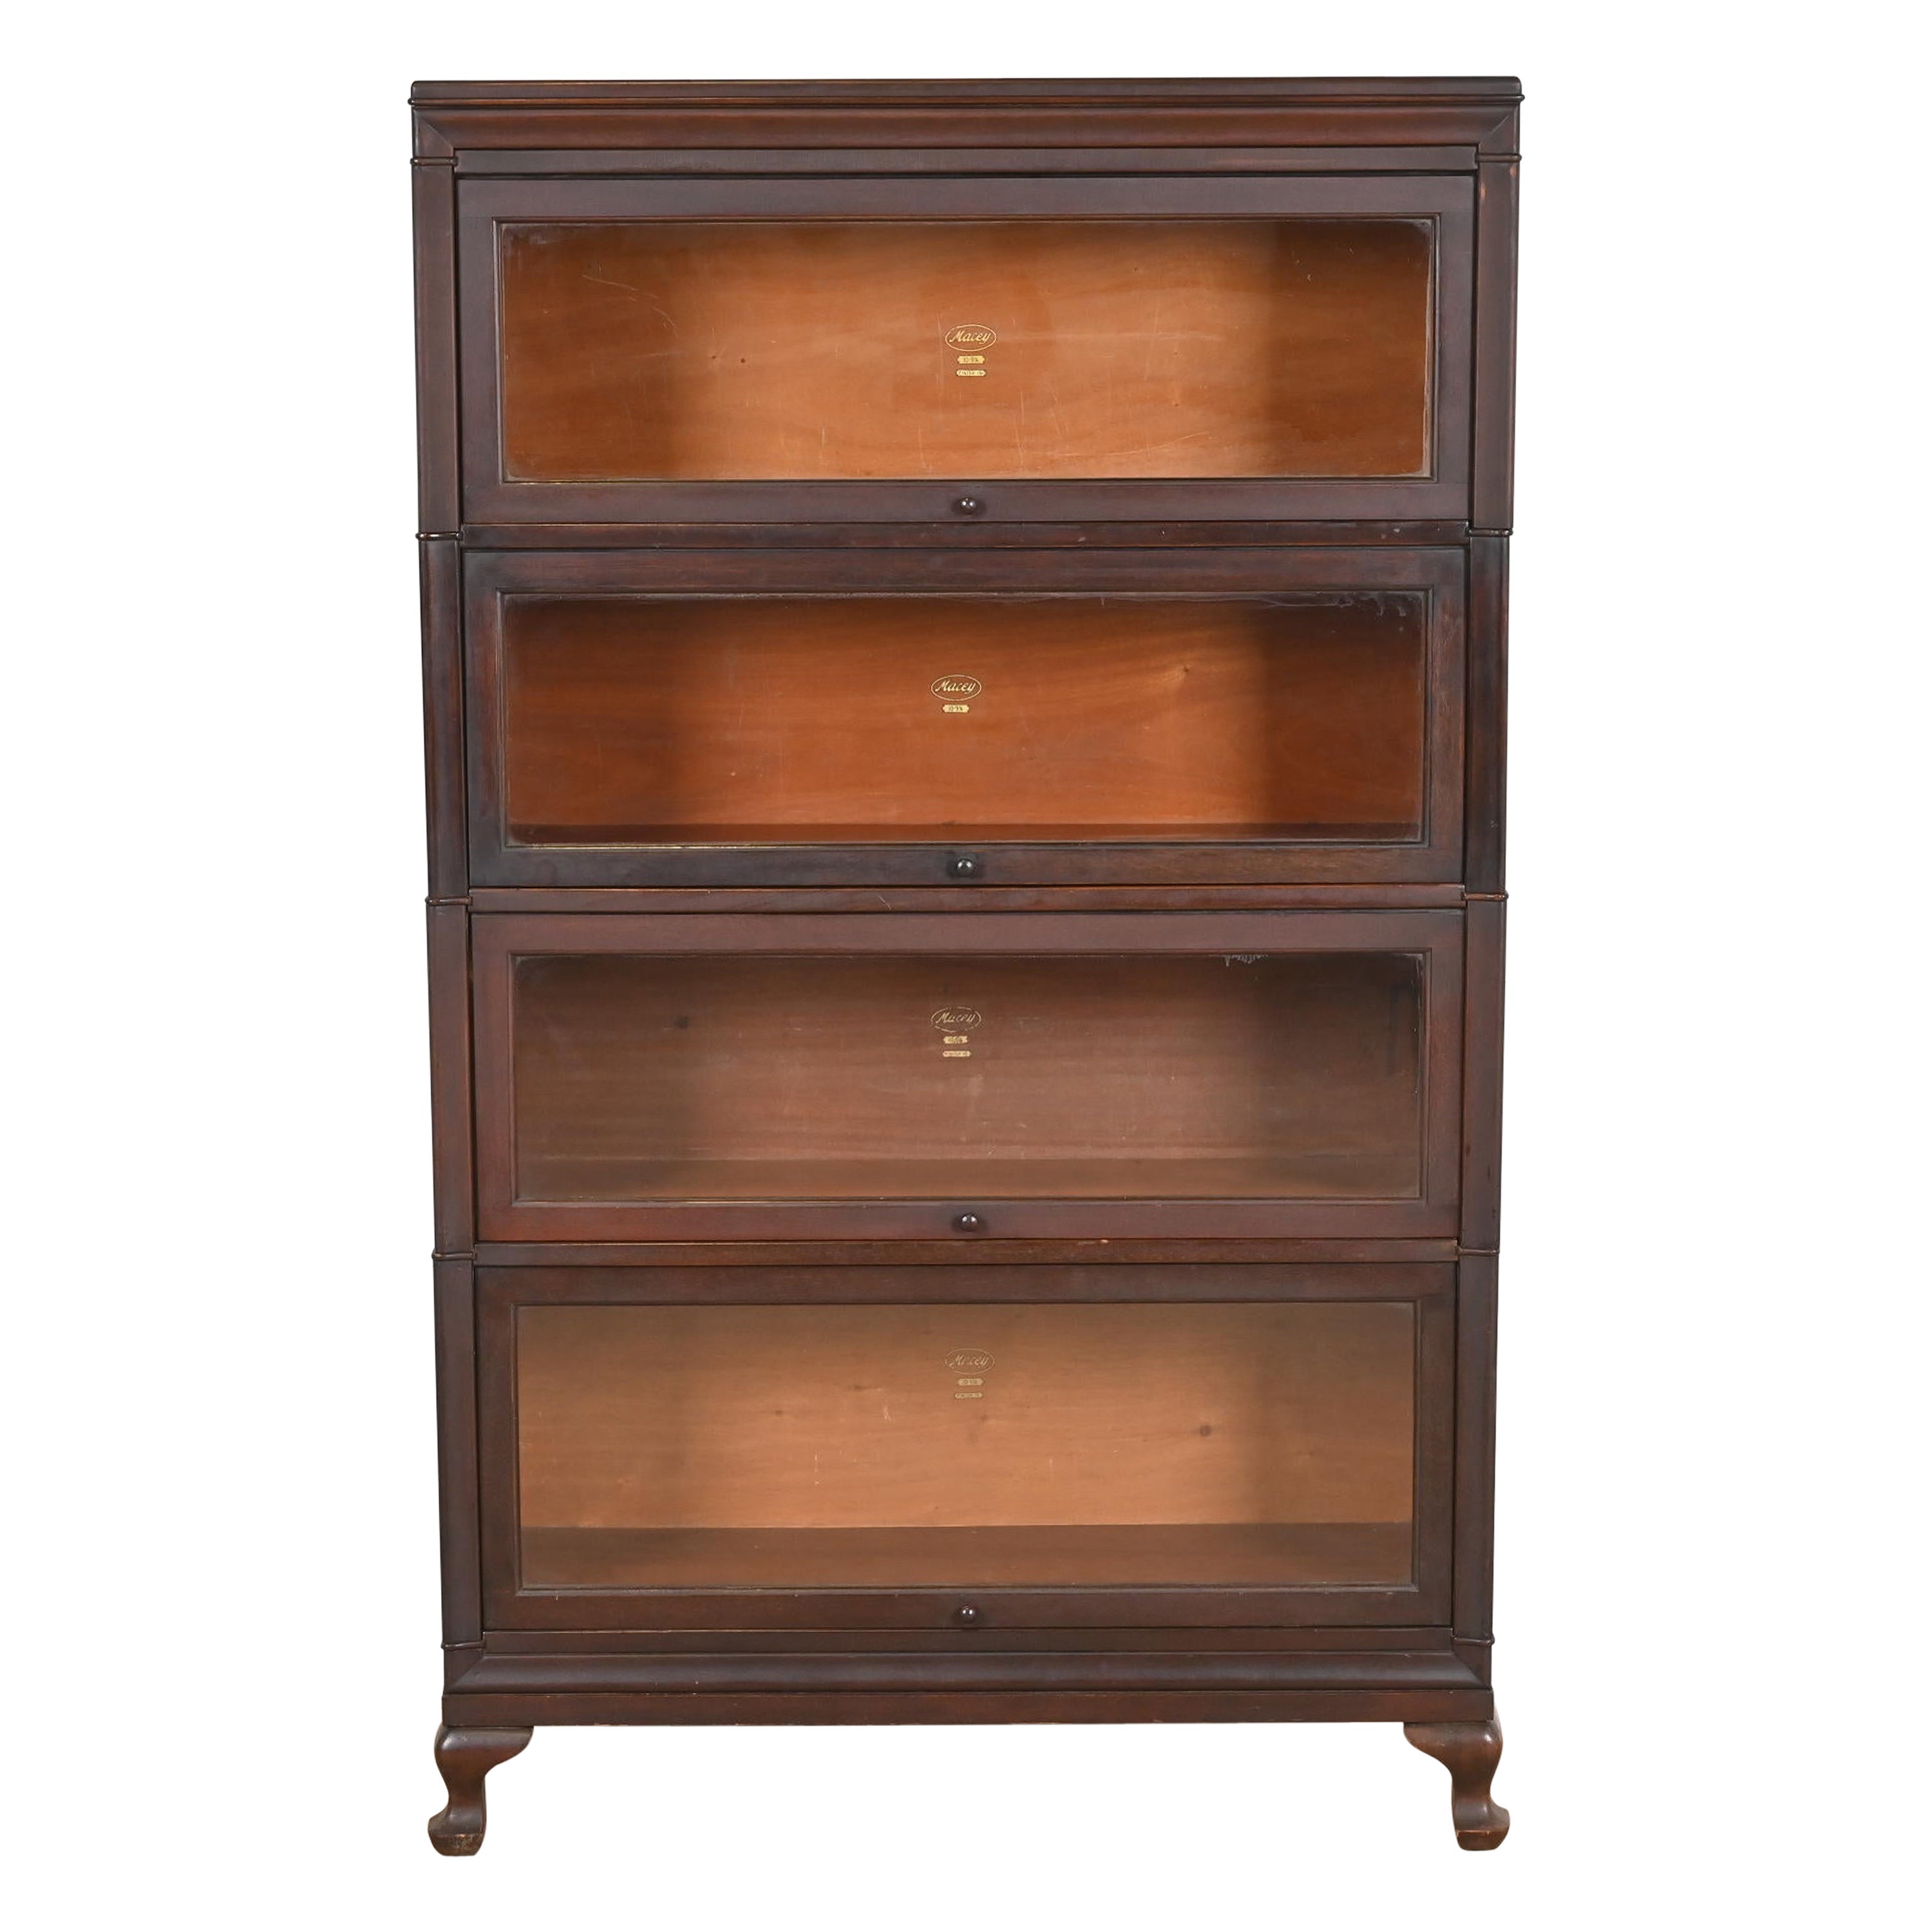 Antique Arts & Crafts Mahogany Four-Stack Barrister Bookcase by Macey, 1920s For Sale